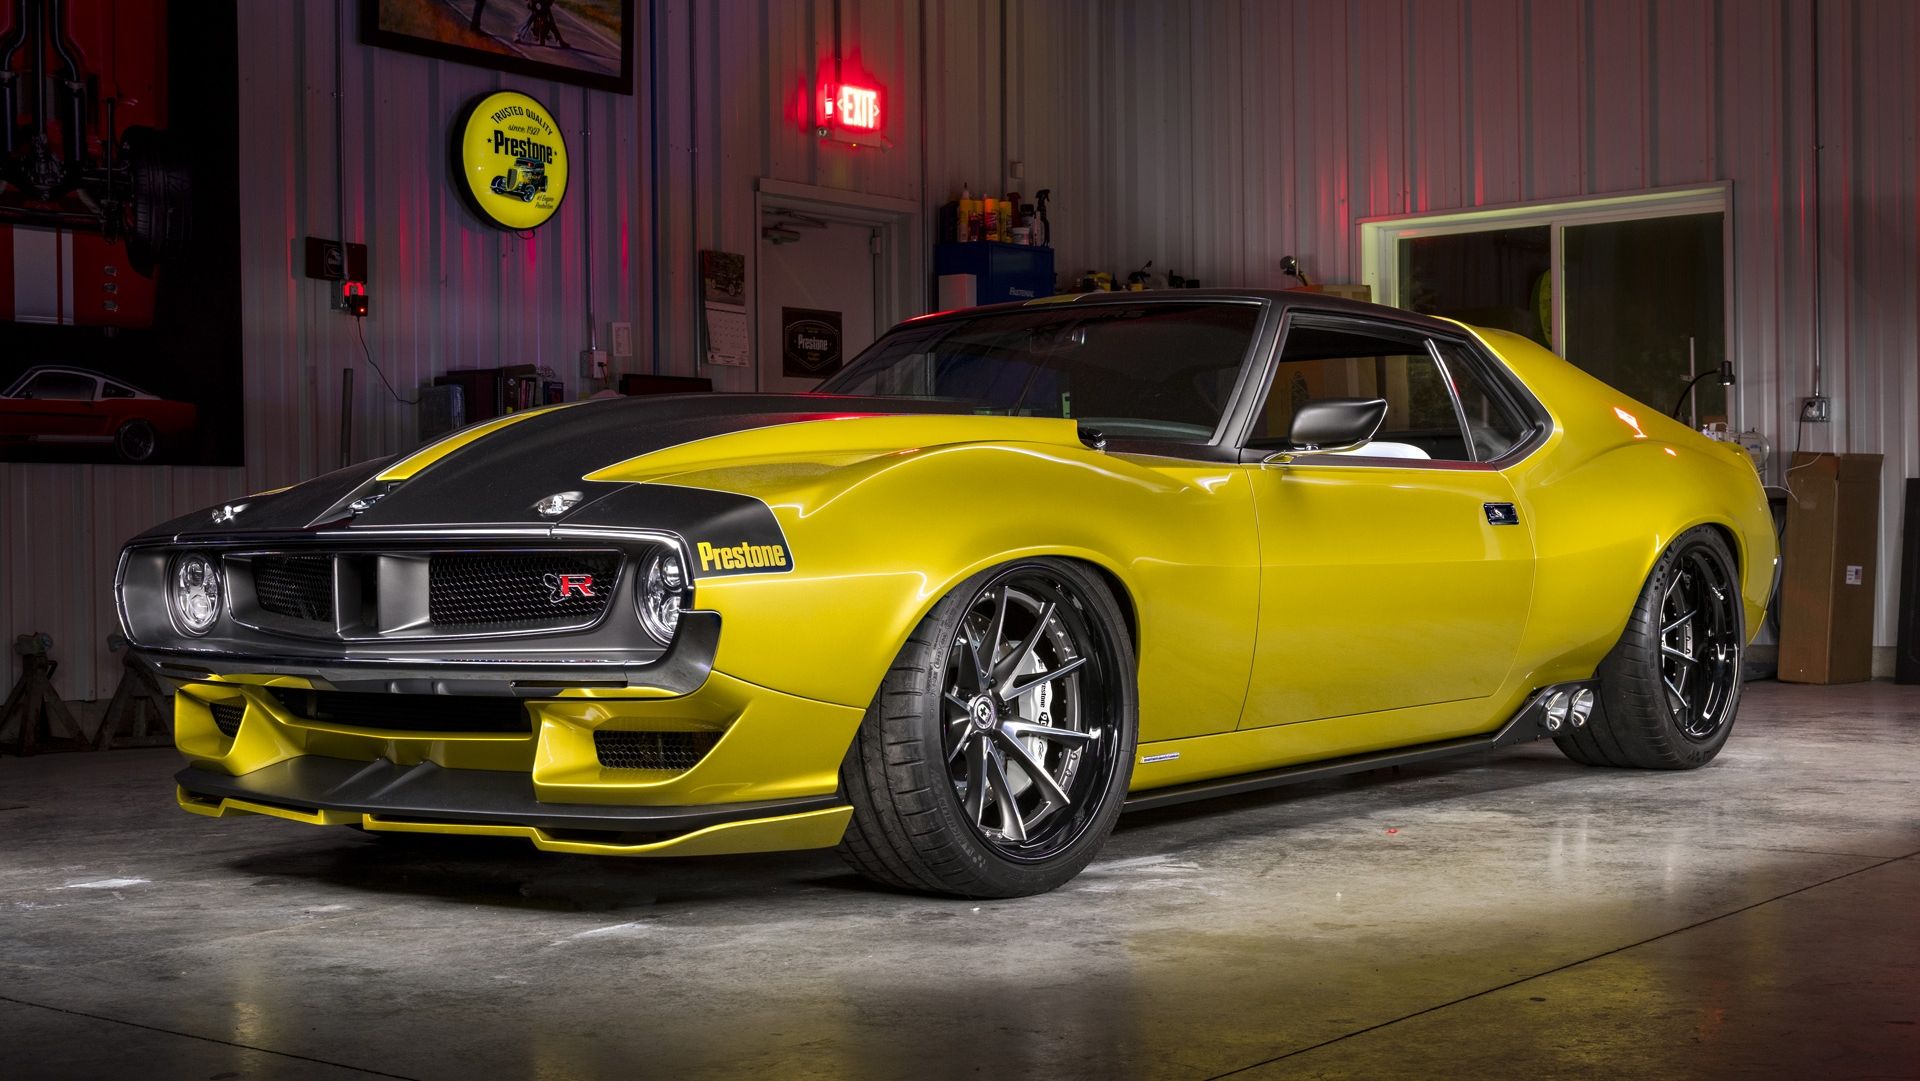 2017 AMC Javelin AMX Deviant by Ringbrothers